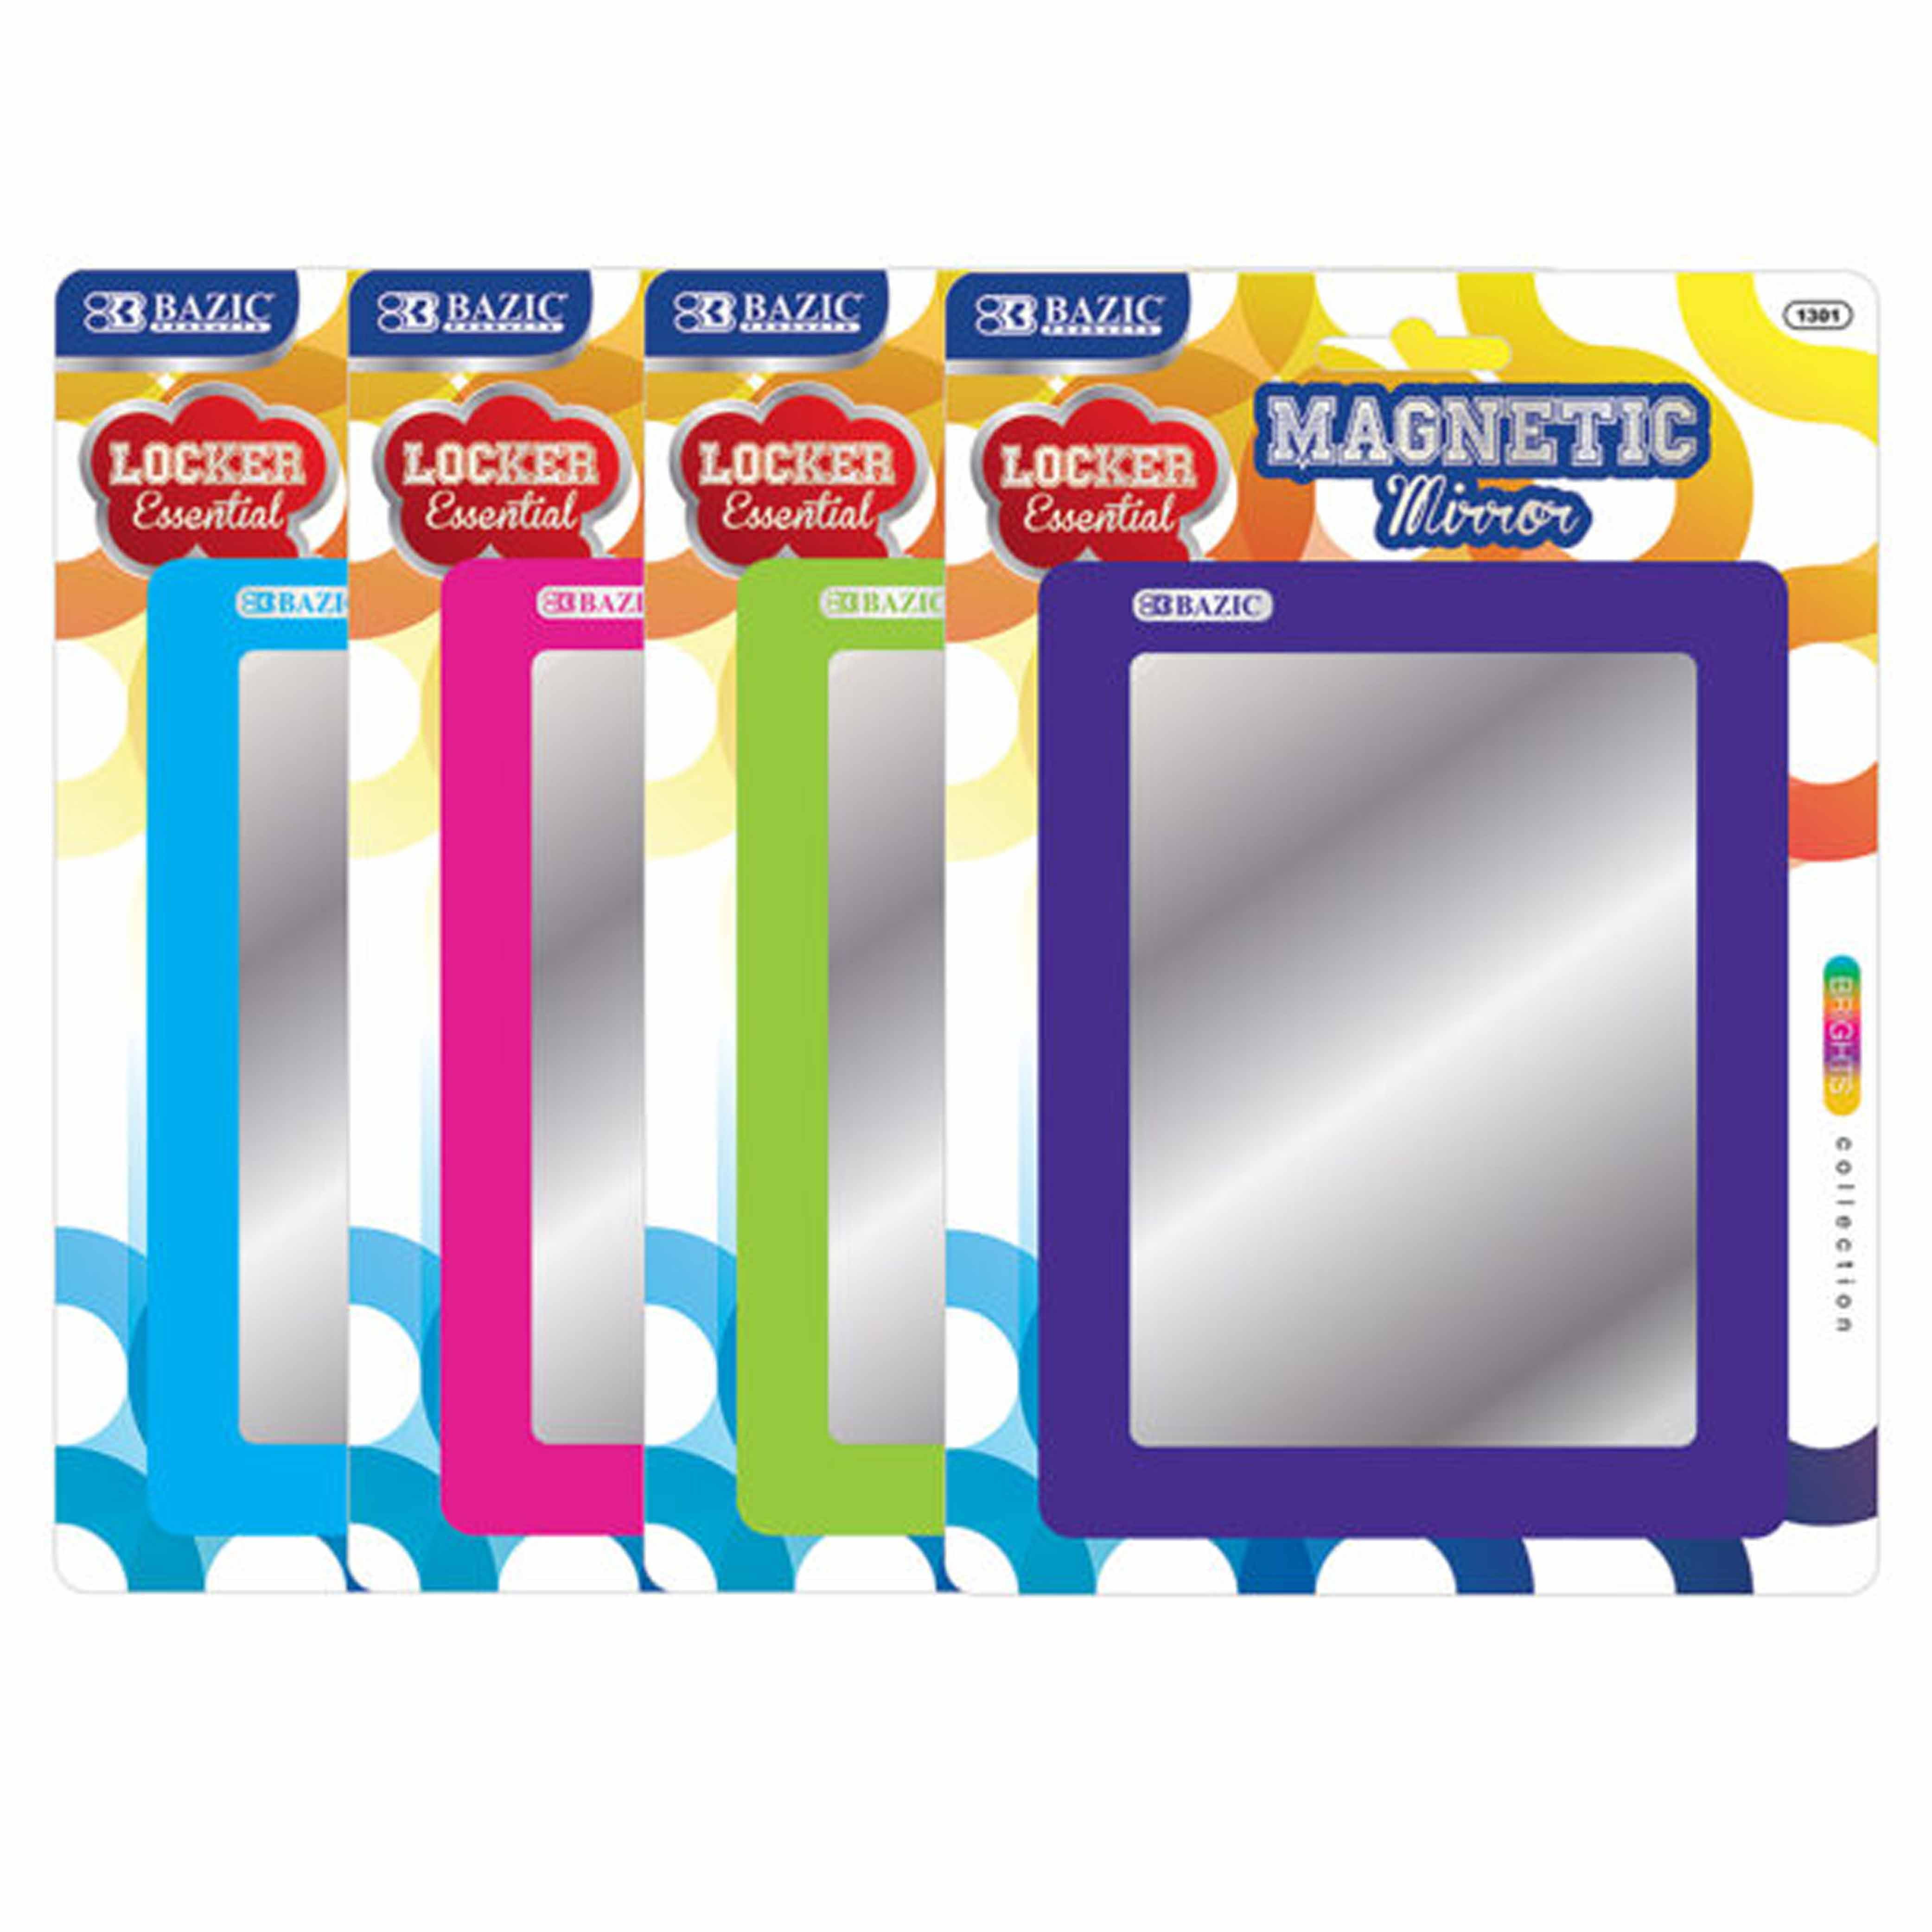 2 Pack Magnetic Locker Mirrors, Acrylic Small Plastic Mirror (4x6 in)